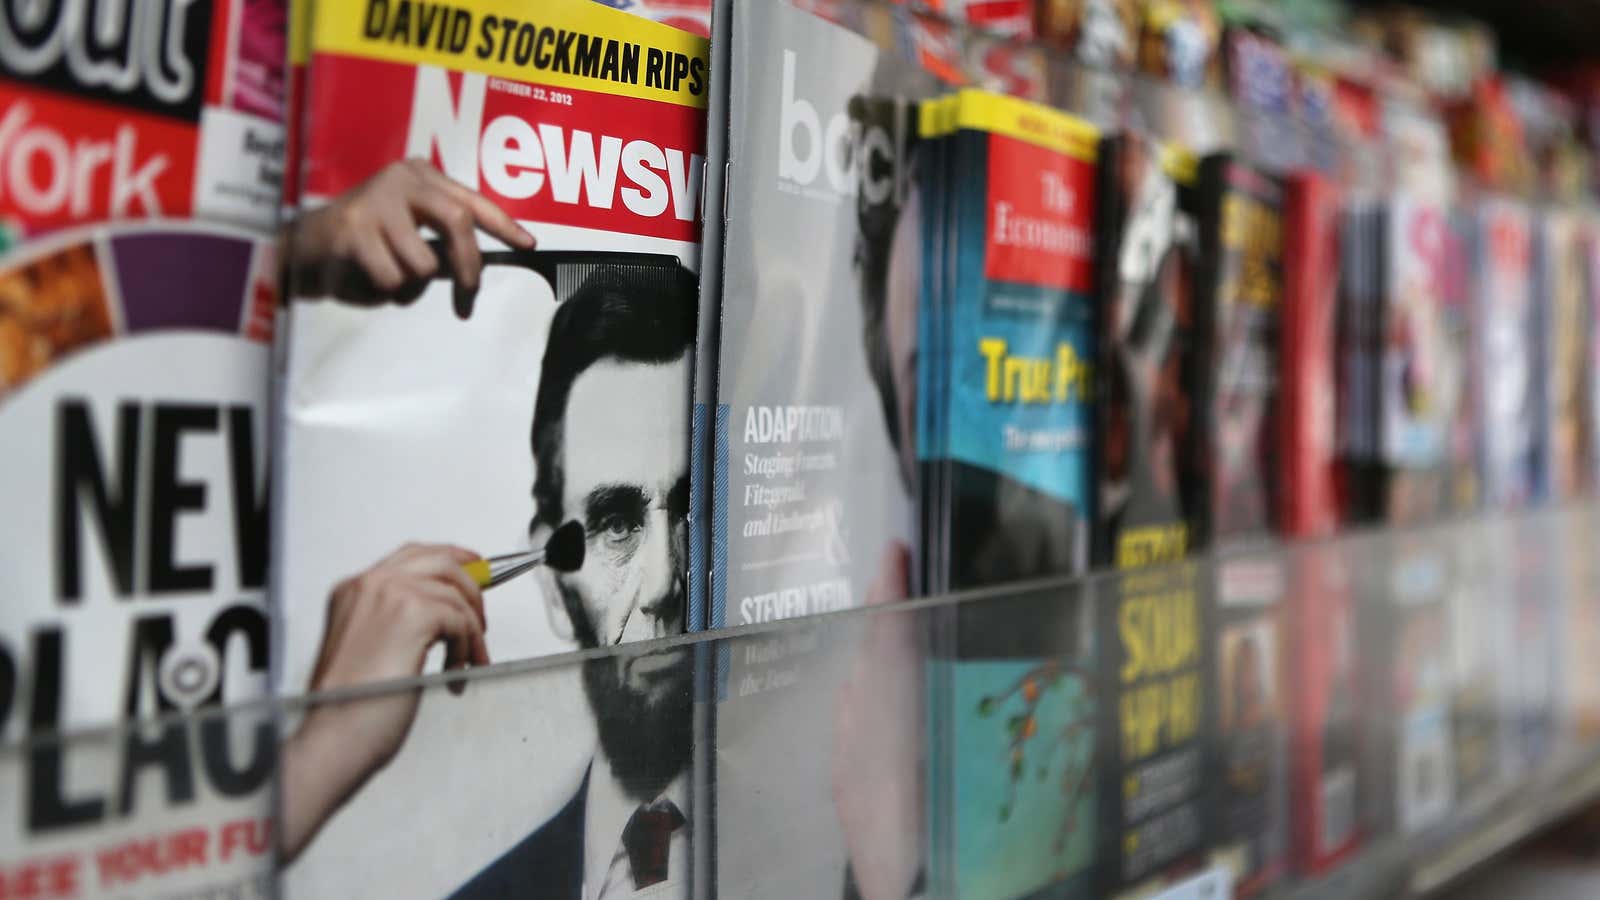 Limited edition: Newsweek’s woes can’t just be blamed on the internet.